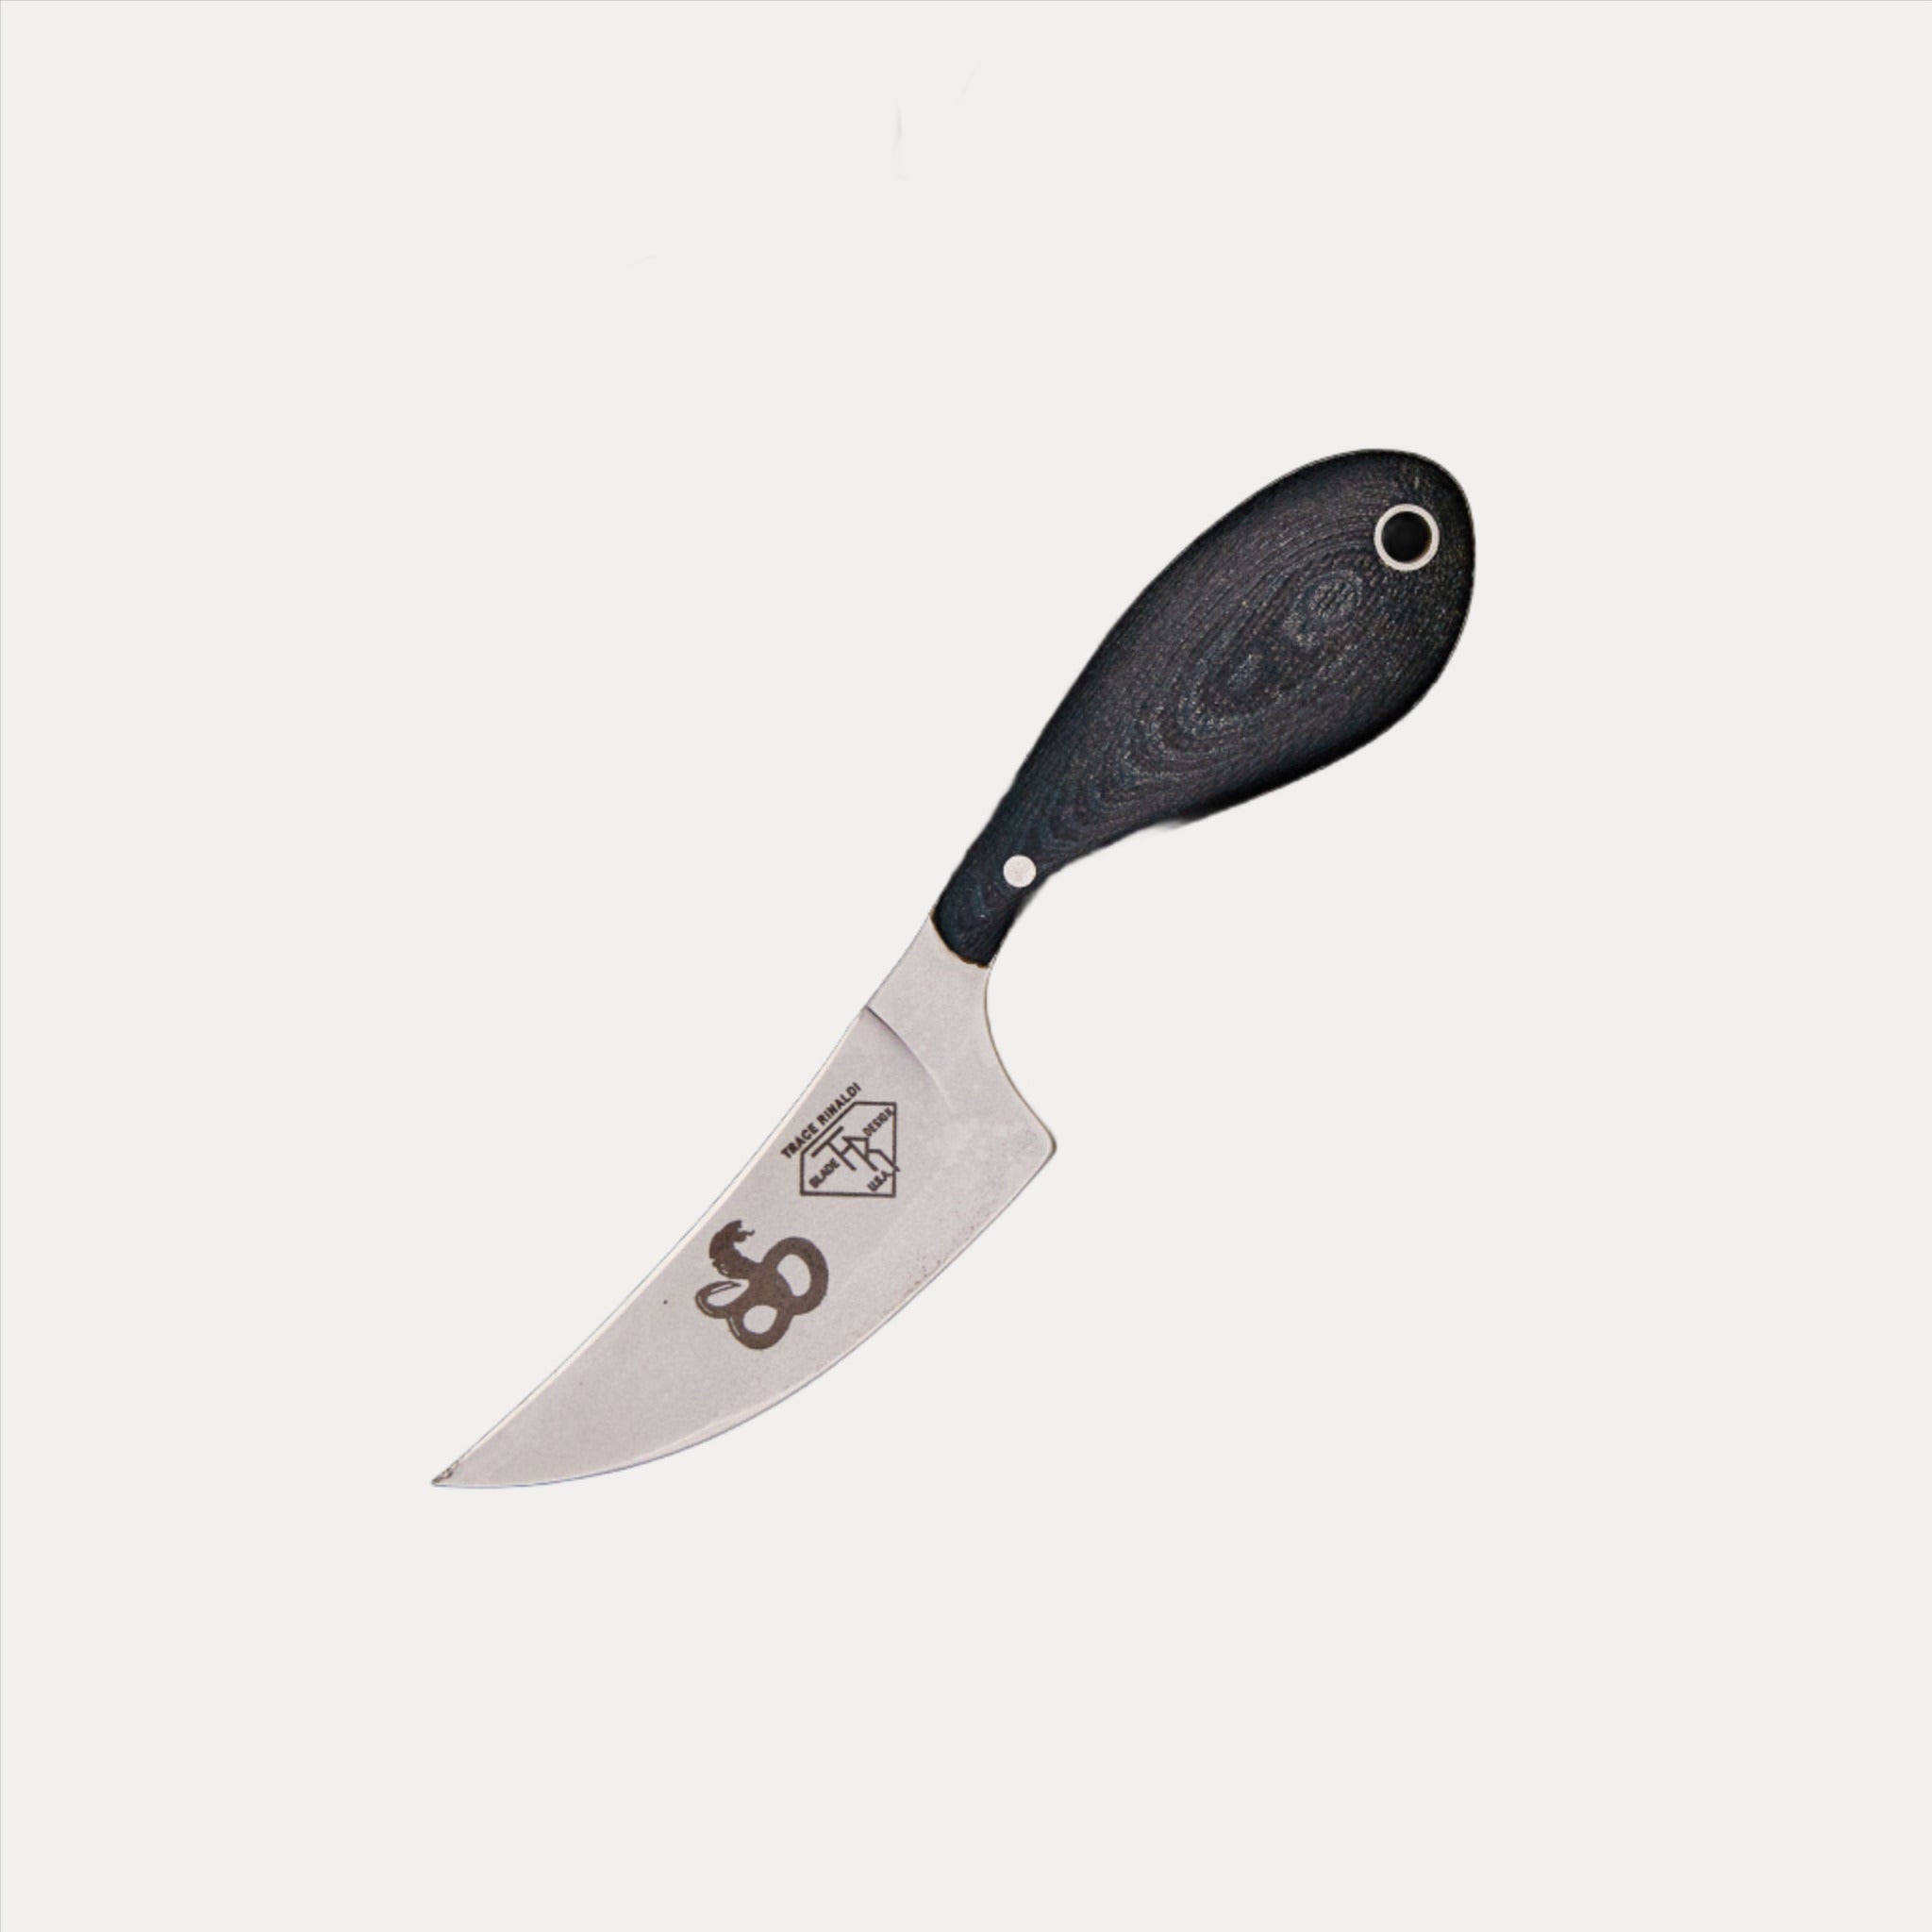 Shivworks Clinch Pick Fixed Blade